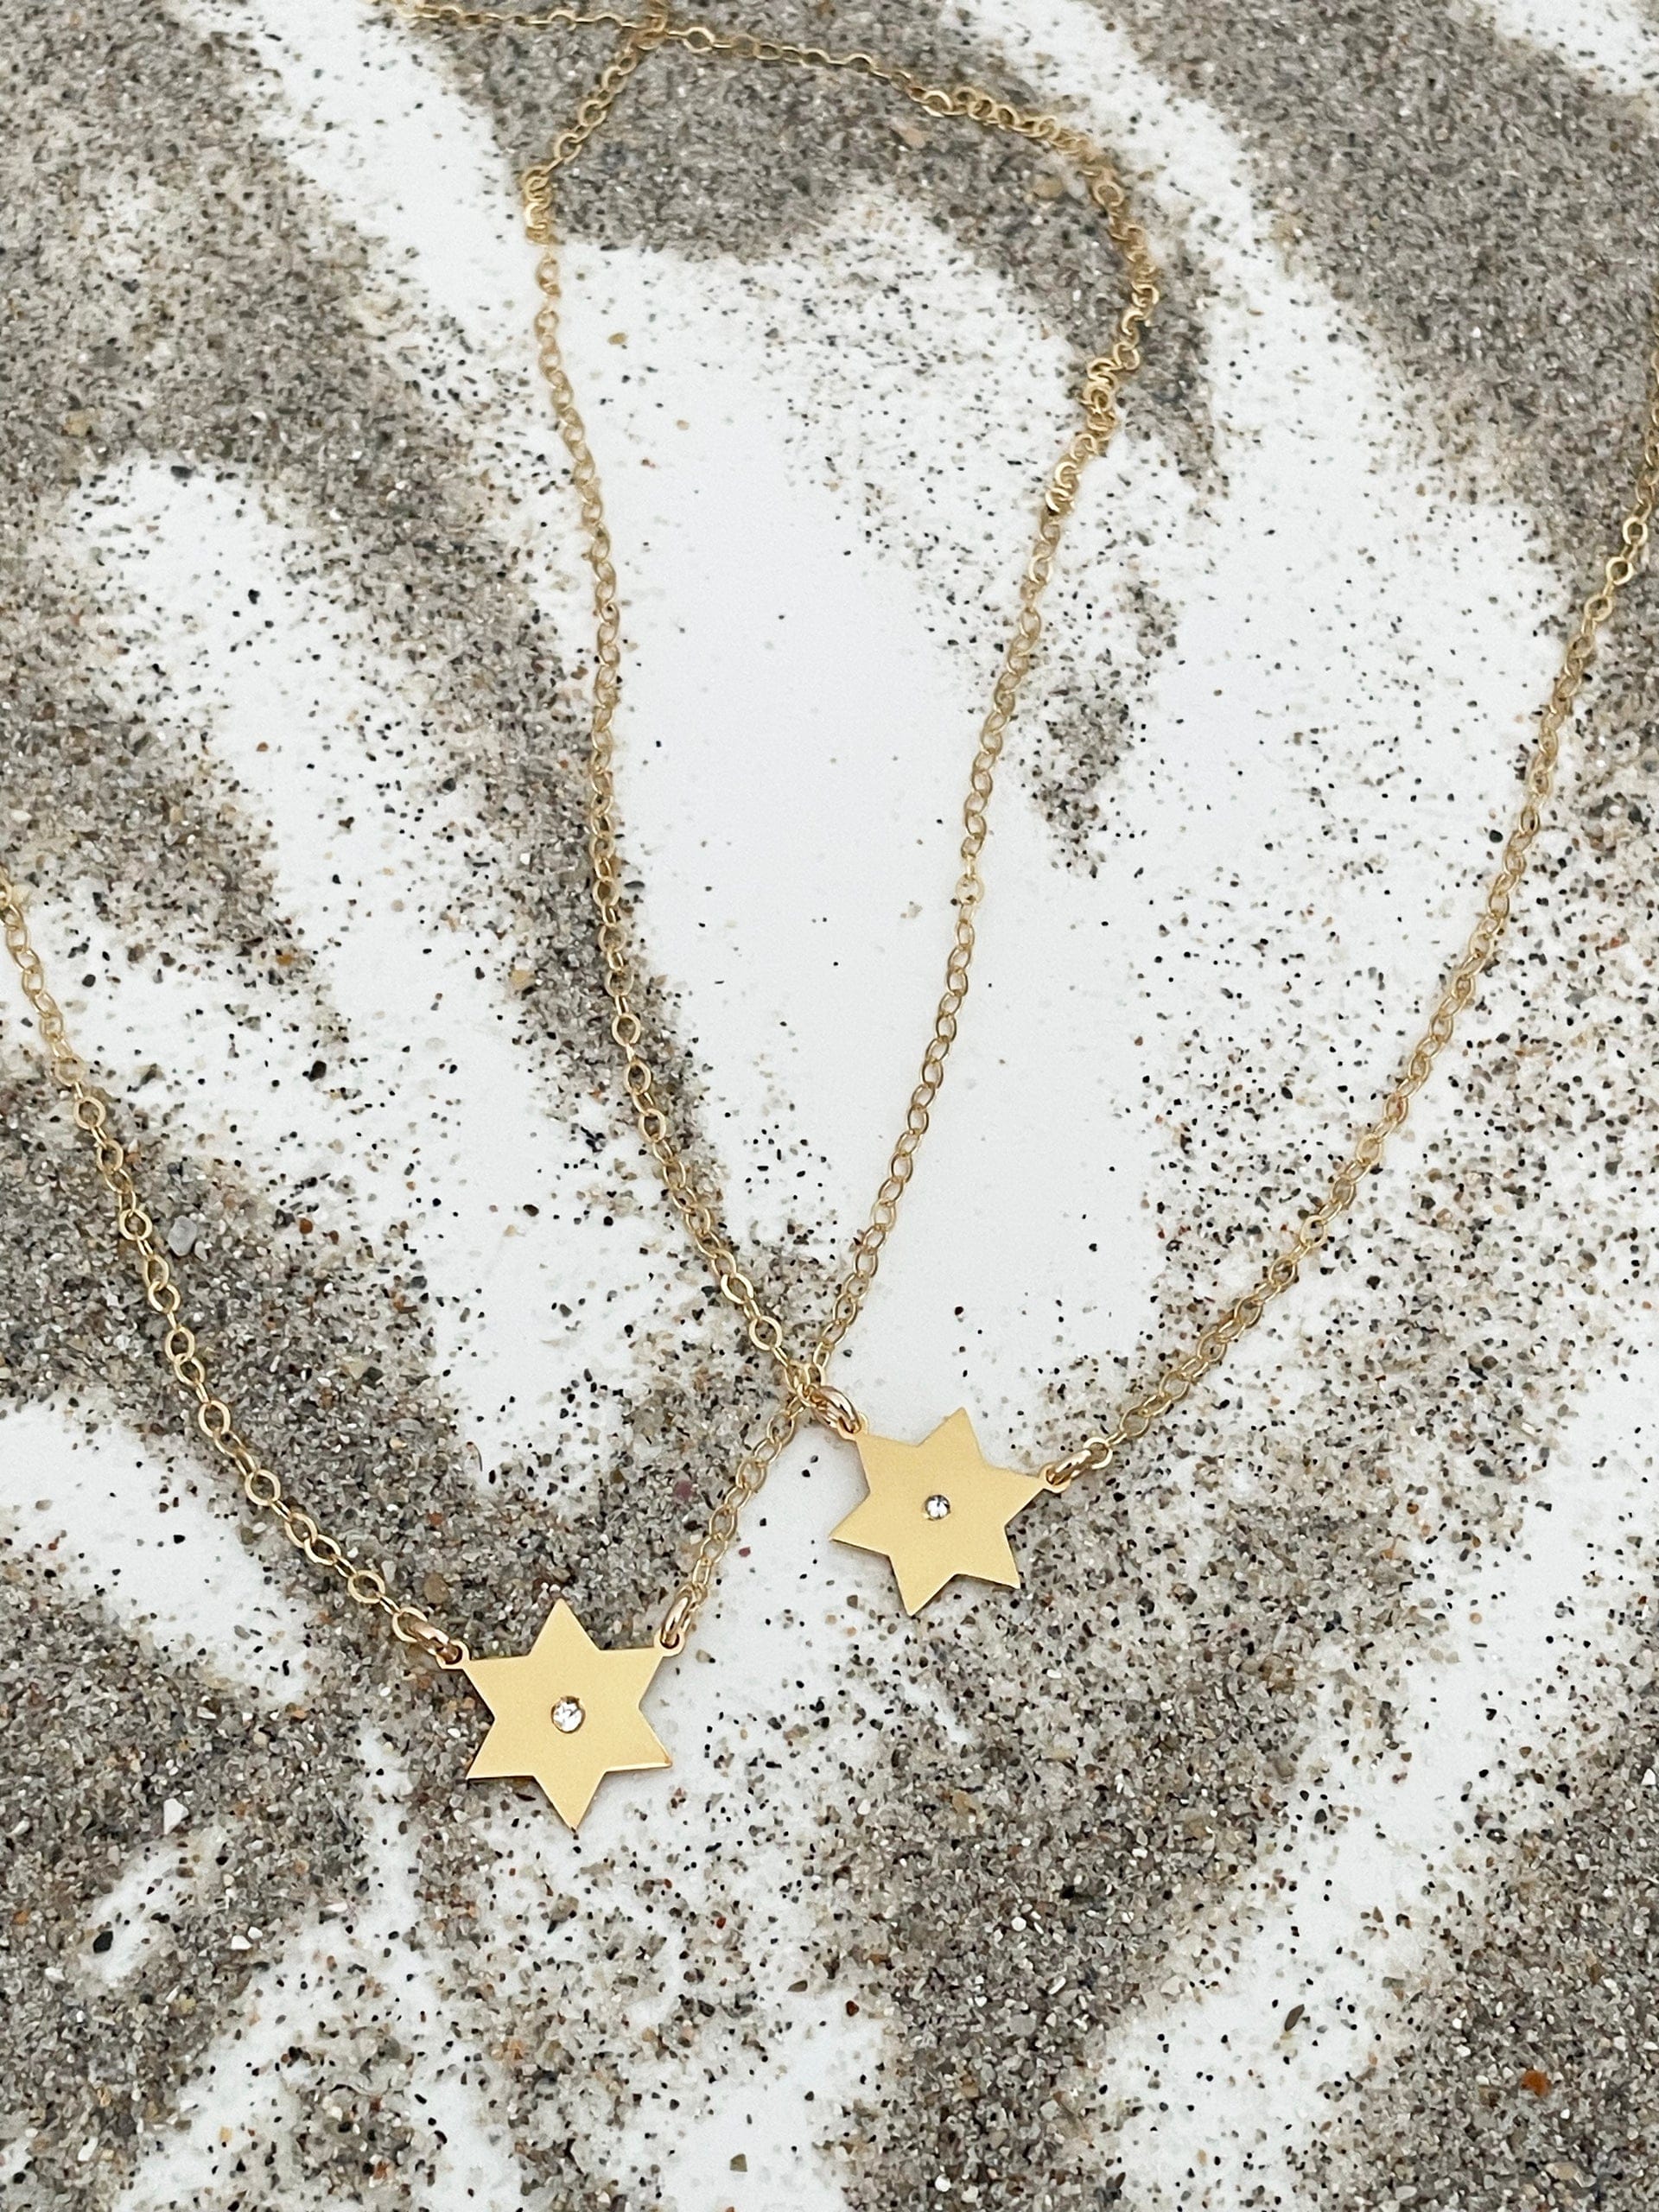 Miriam Merenfeld Jewelry Necklaces Golda Star of David Diamond Necklace - Sterling Silver, Gold Vermeil or Two-Tone